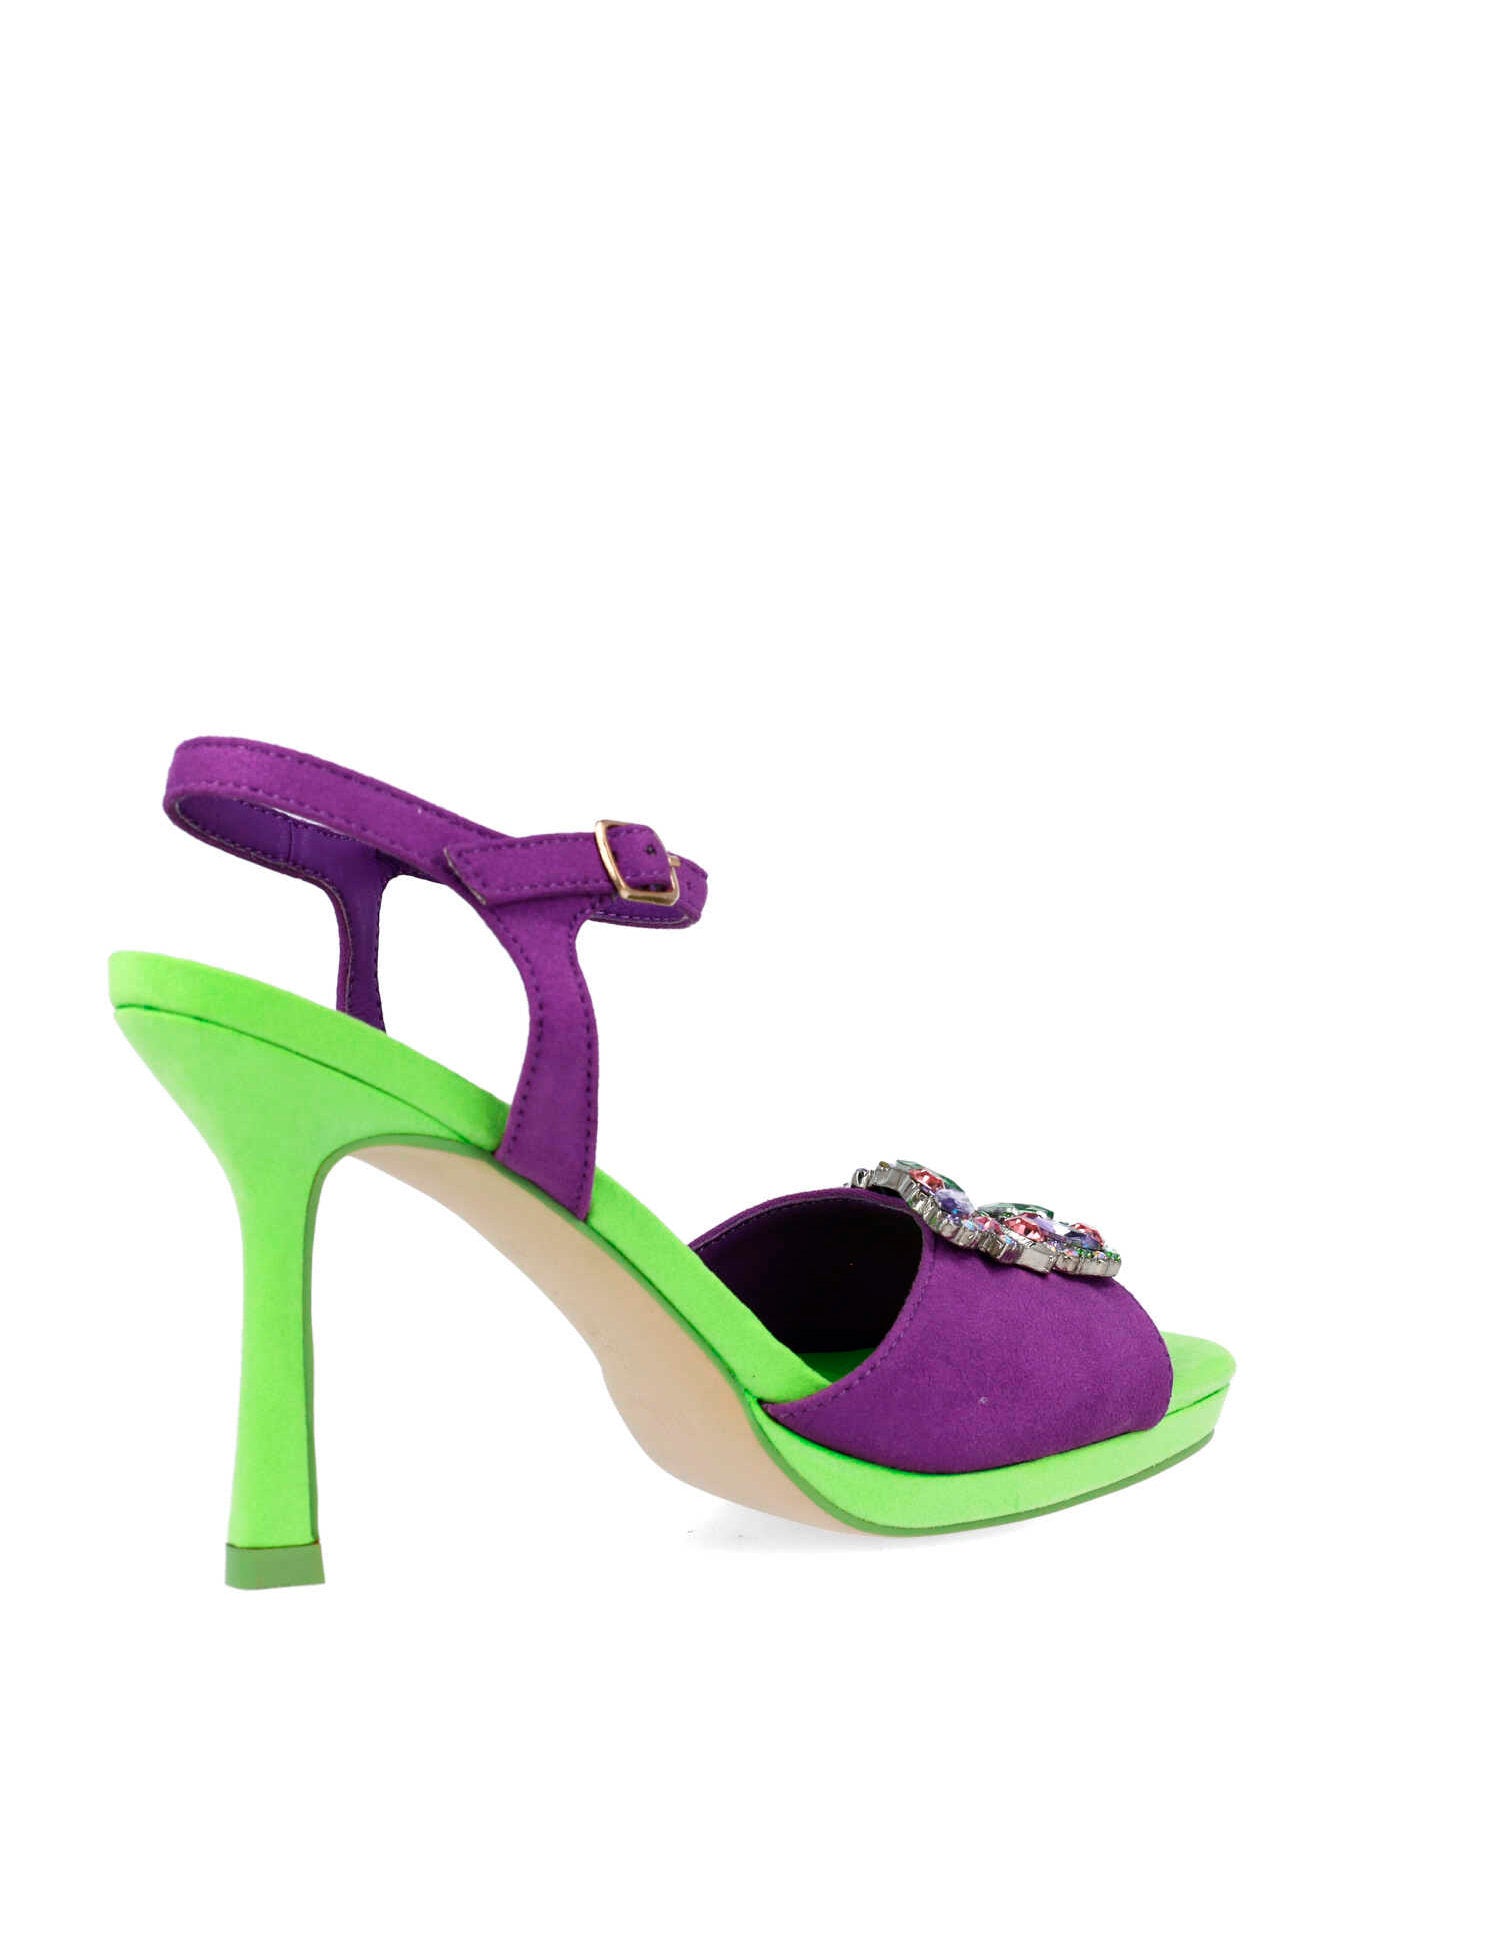 Multi-Color High-Heel Sandals With Embellishment_25259_08_03